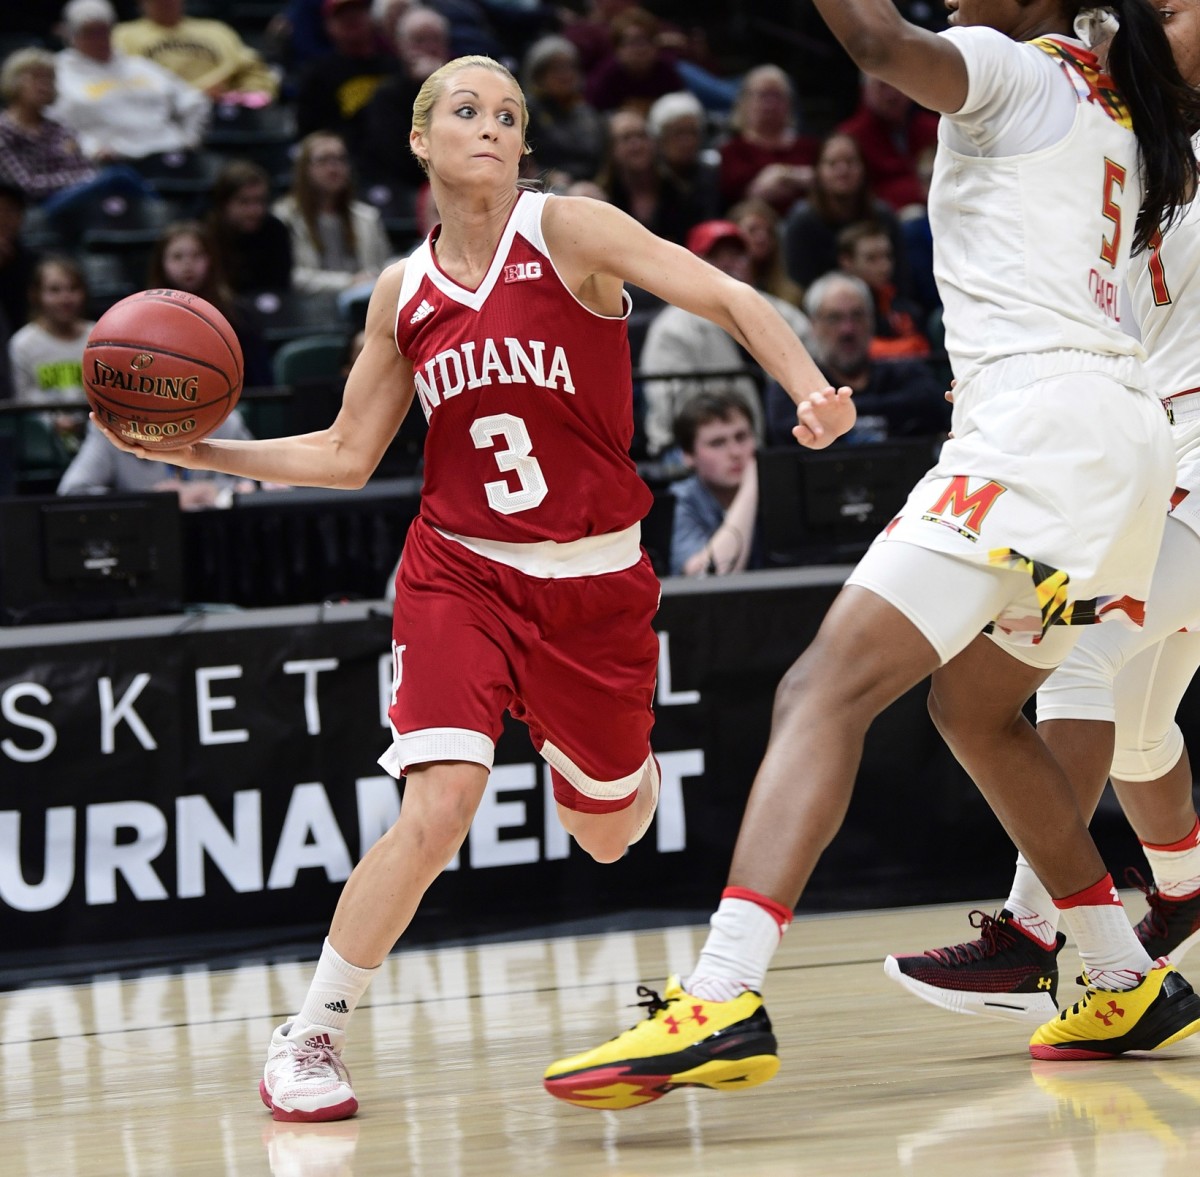 Mar 2, 2018; Indianapolis, IN, USA; Indiana Hoosiers guard Tyra Buss (3) winds up to pass the ball around some Maryland Terrapins in the first period during the third round of the Big Ten Conference Tournament at Bankers Life Fieldhouse.